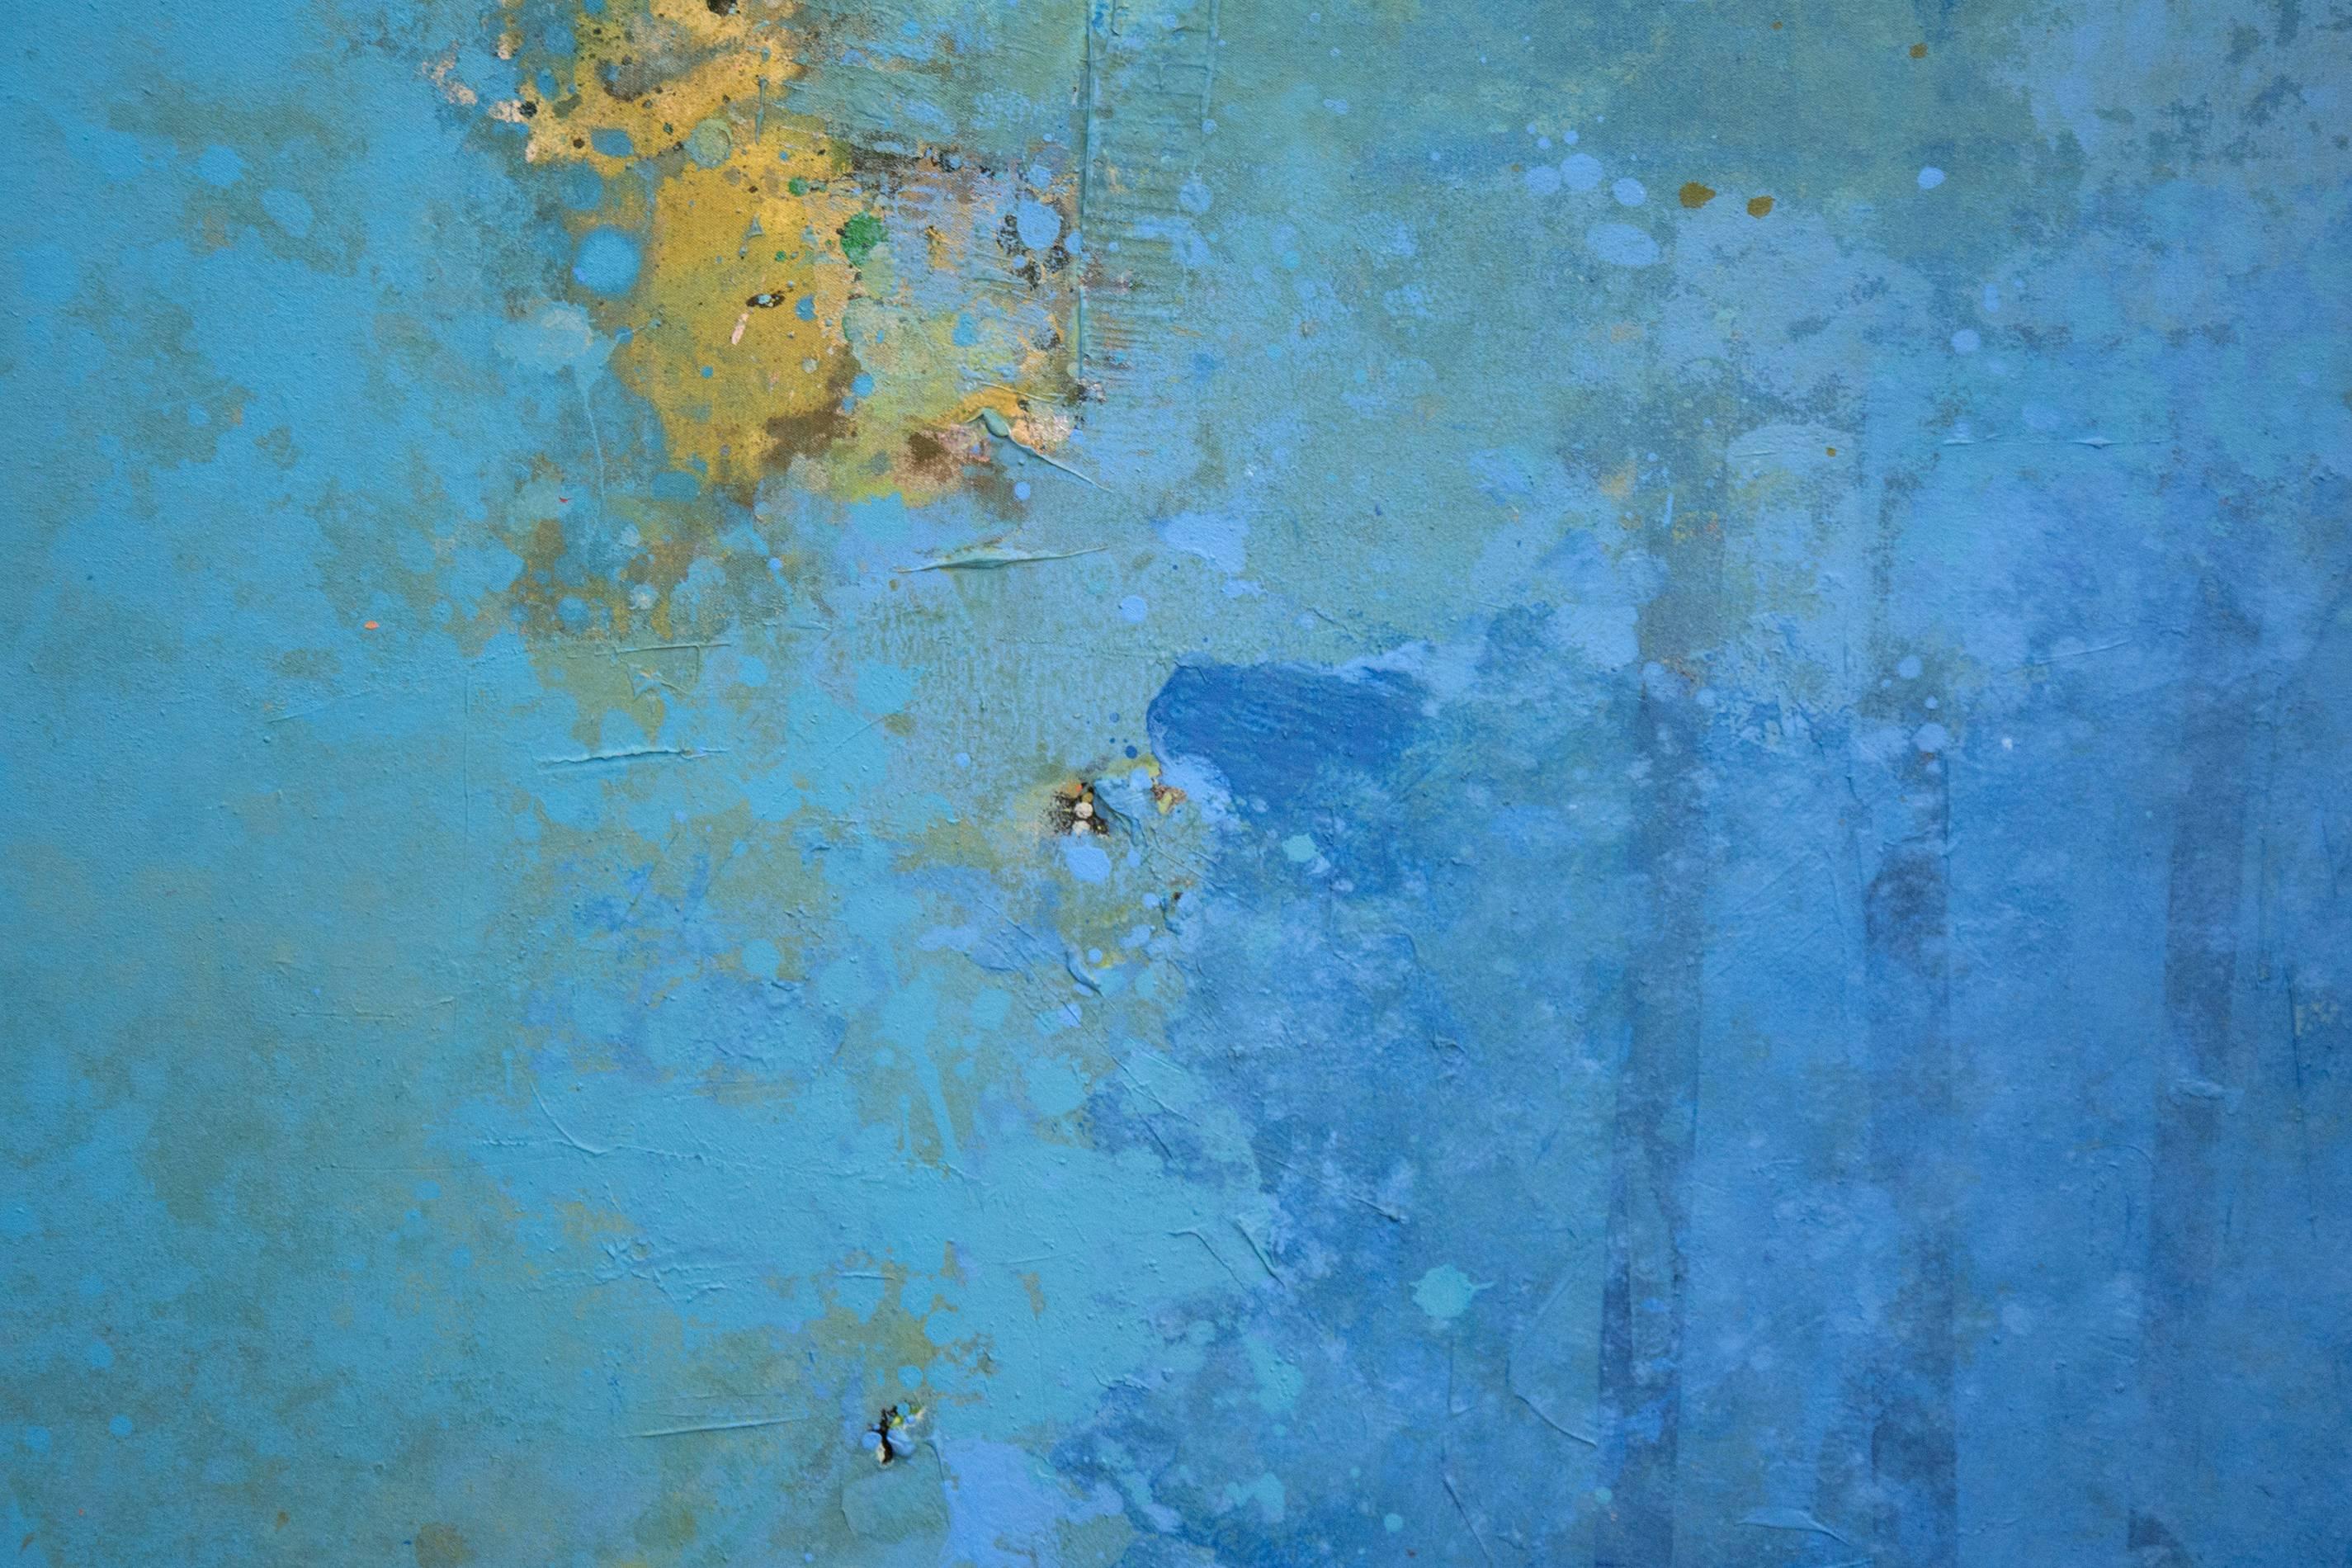 Abstraction in Blue and Burnt Sienna - Painting by John Richard Fox